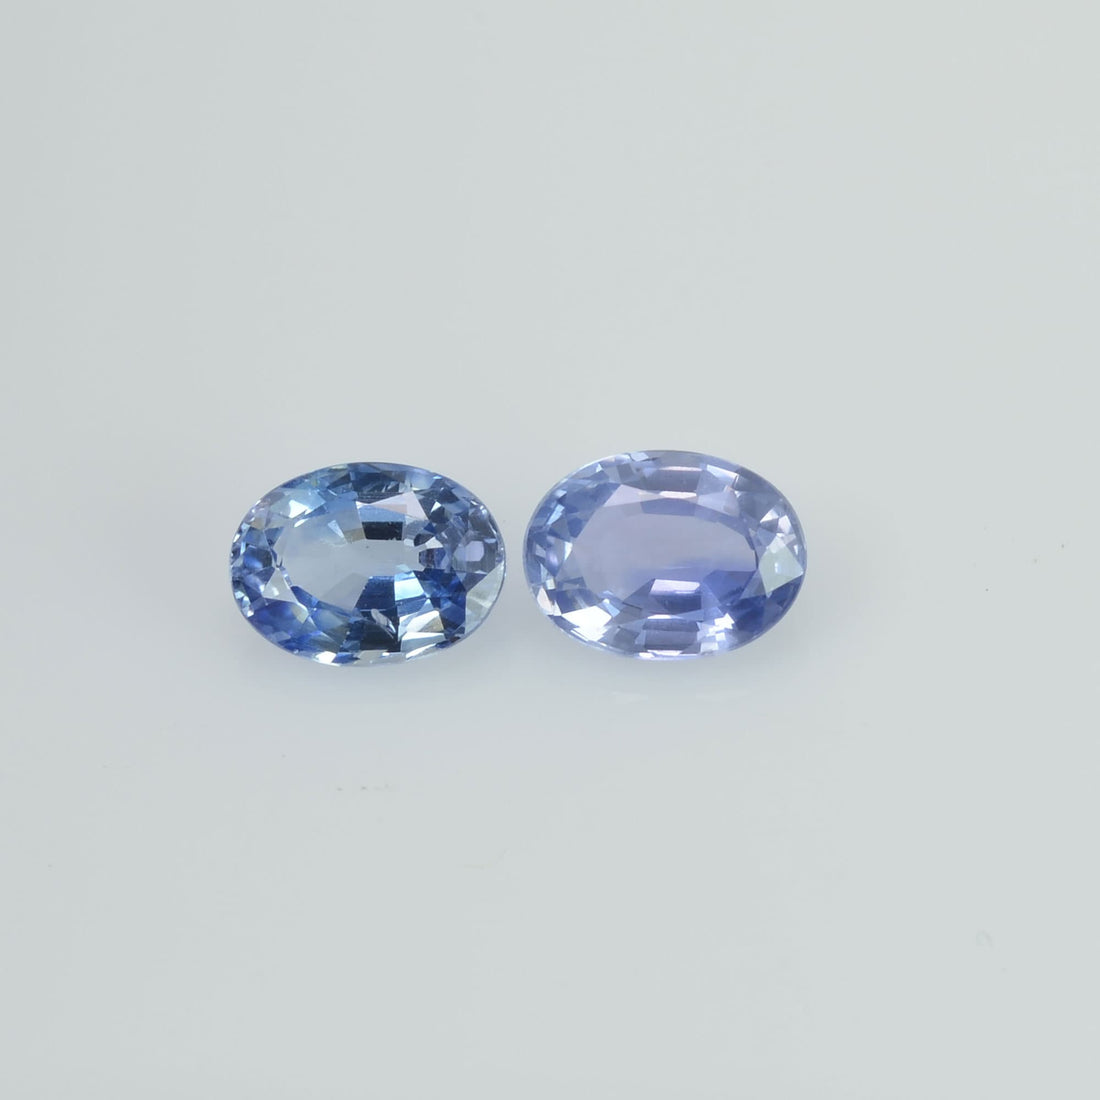 1.46 cts Natural Blue Sapphire Loose Pair Gemstone Oval Cut